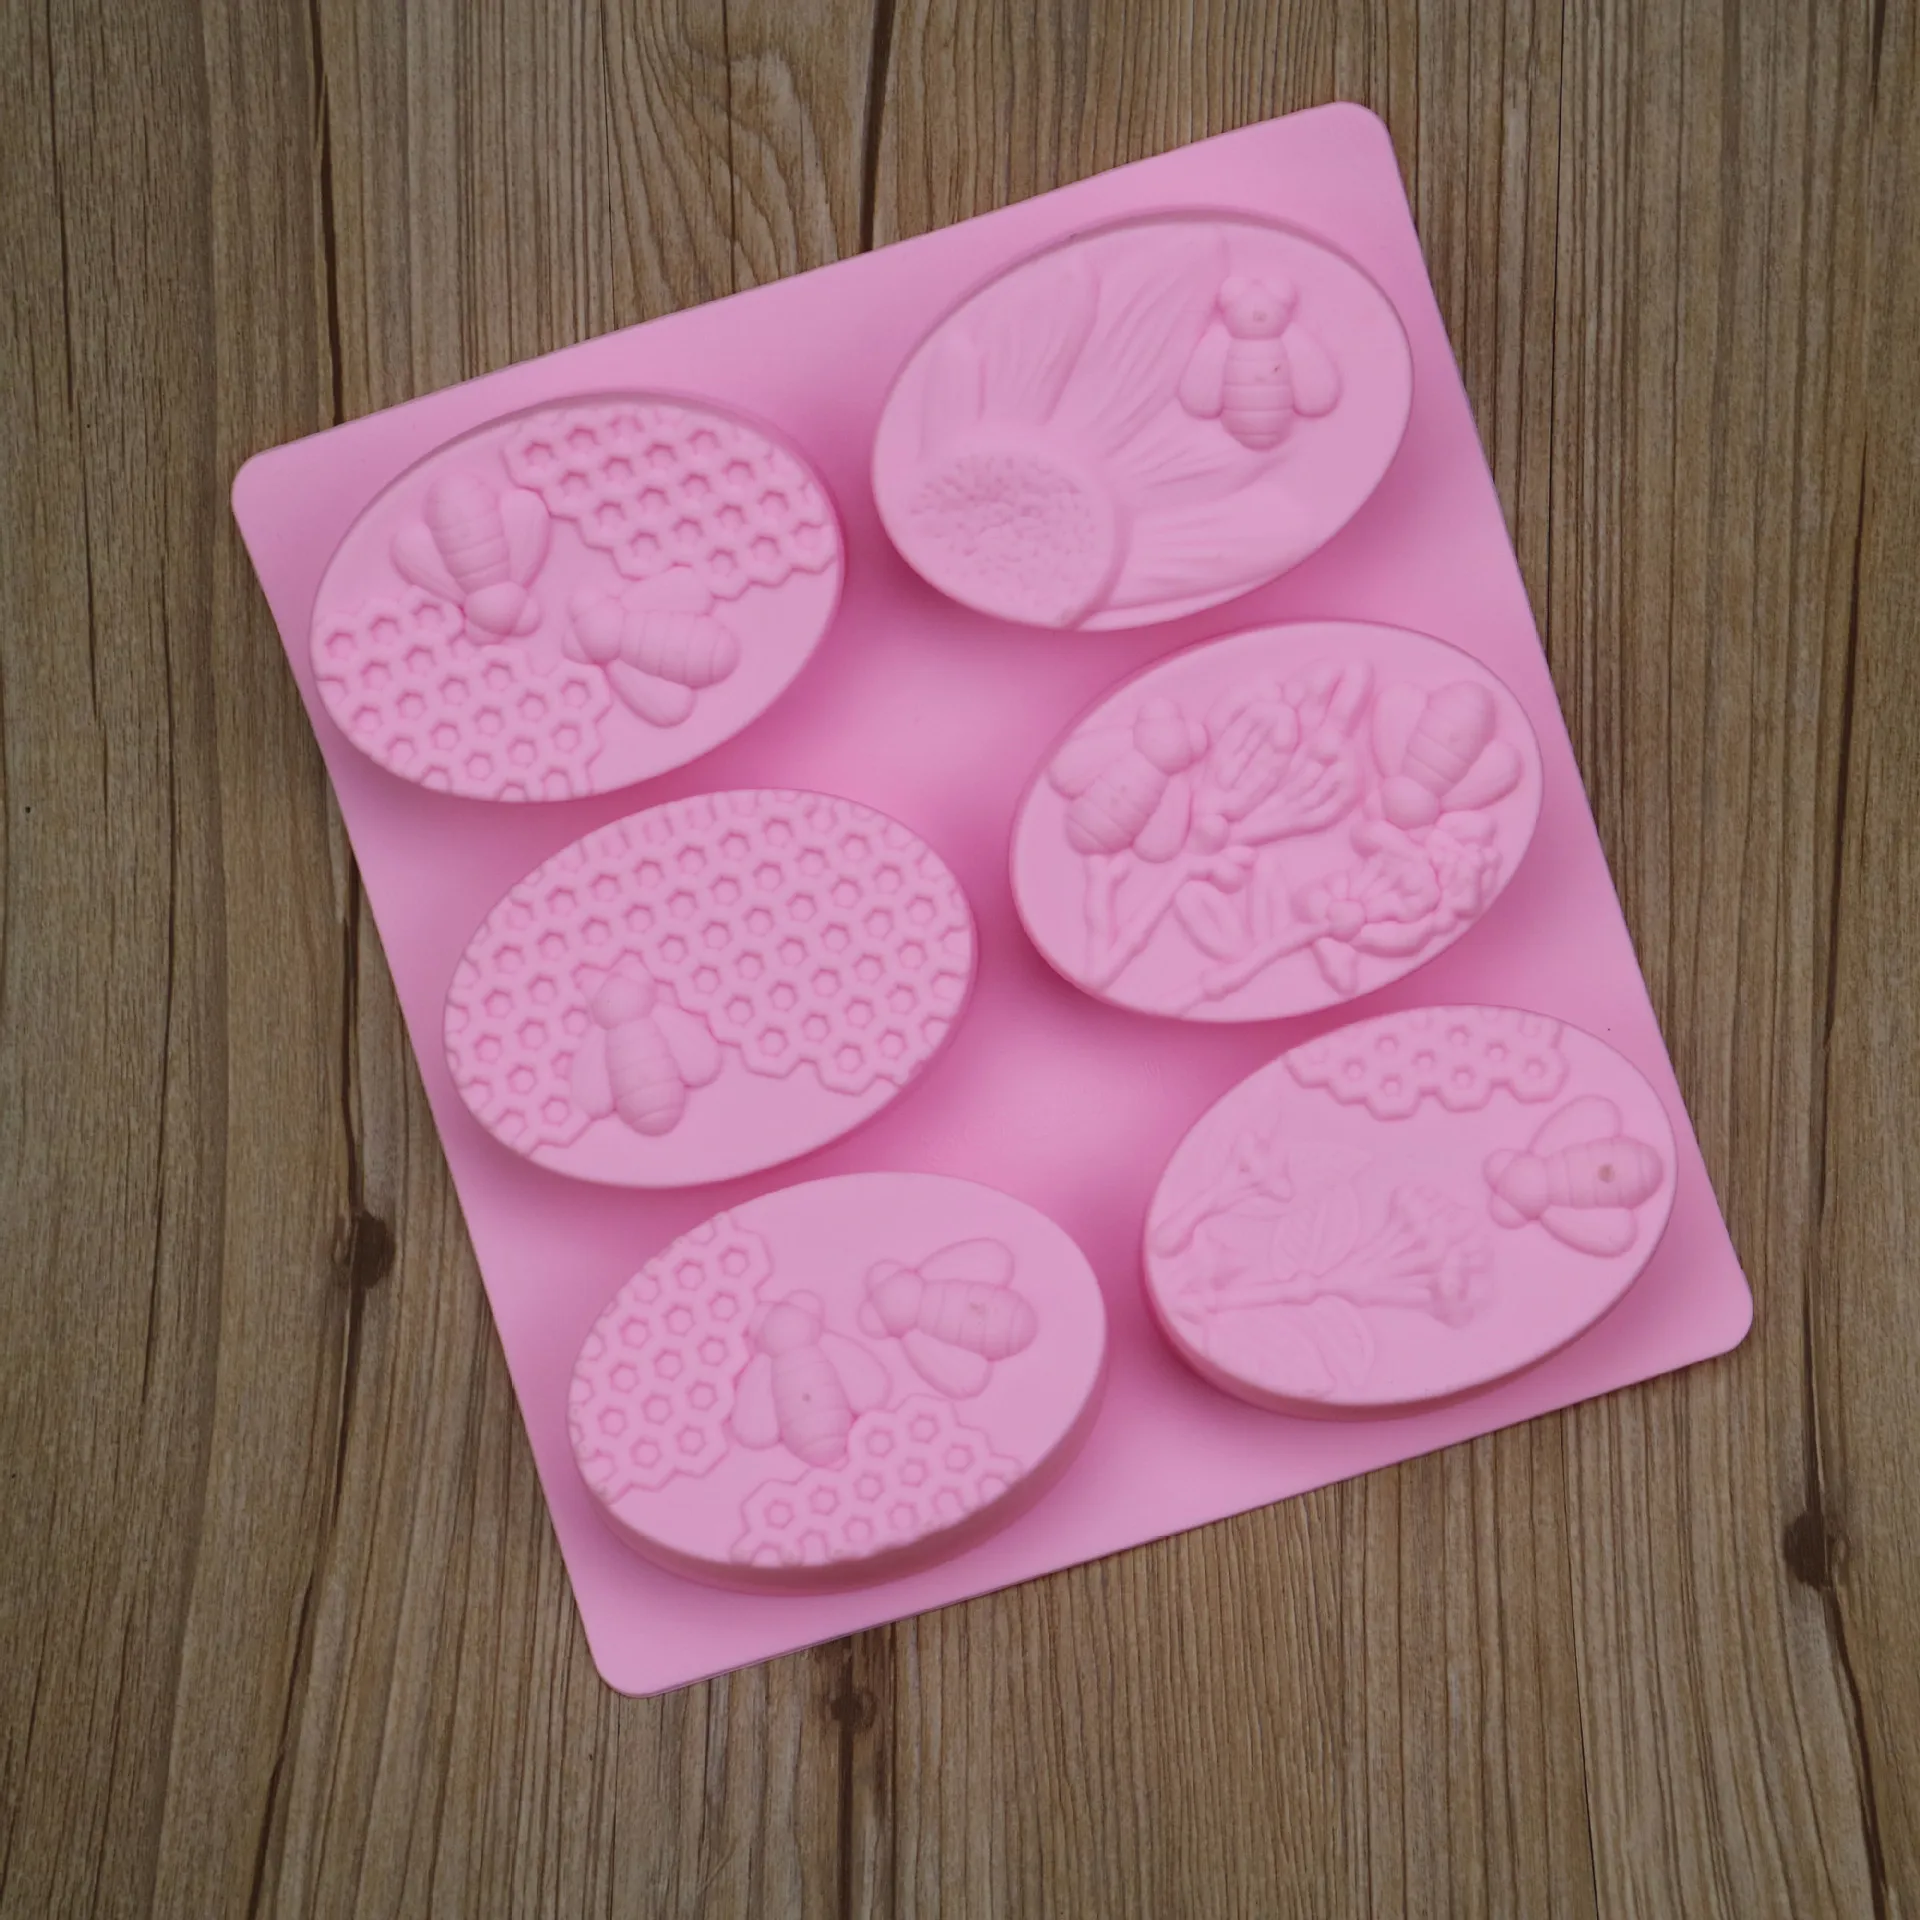 Details about   HomEdge 6-Cavity Oval Silicone Mold 3 Packs Molds For Making Handmade Soap, 